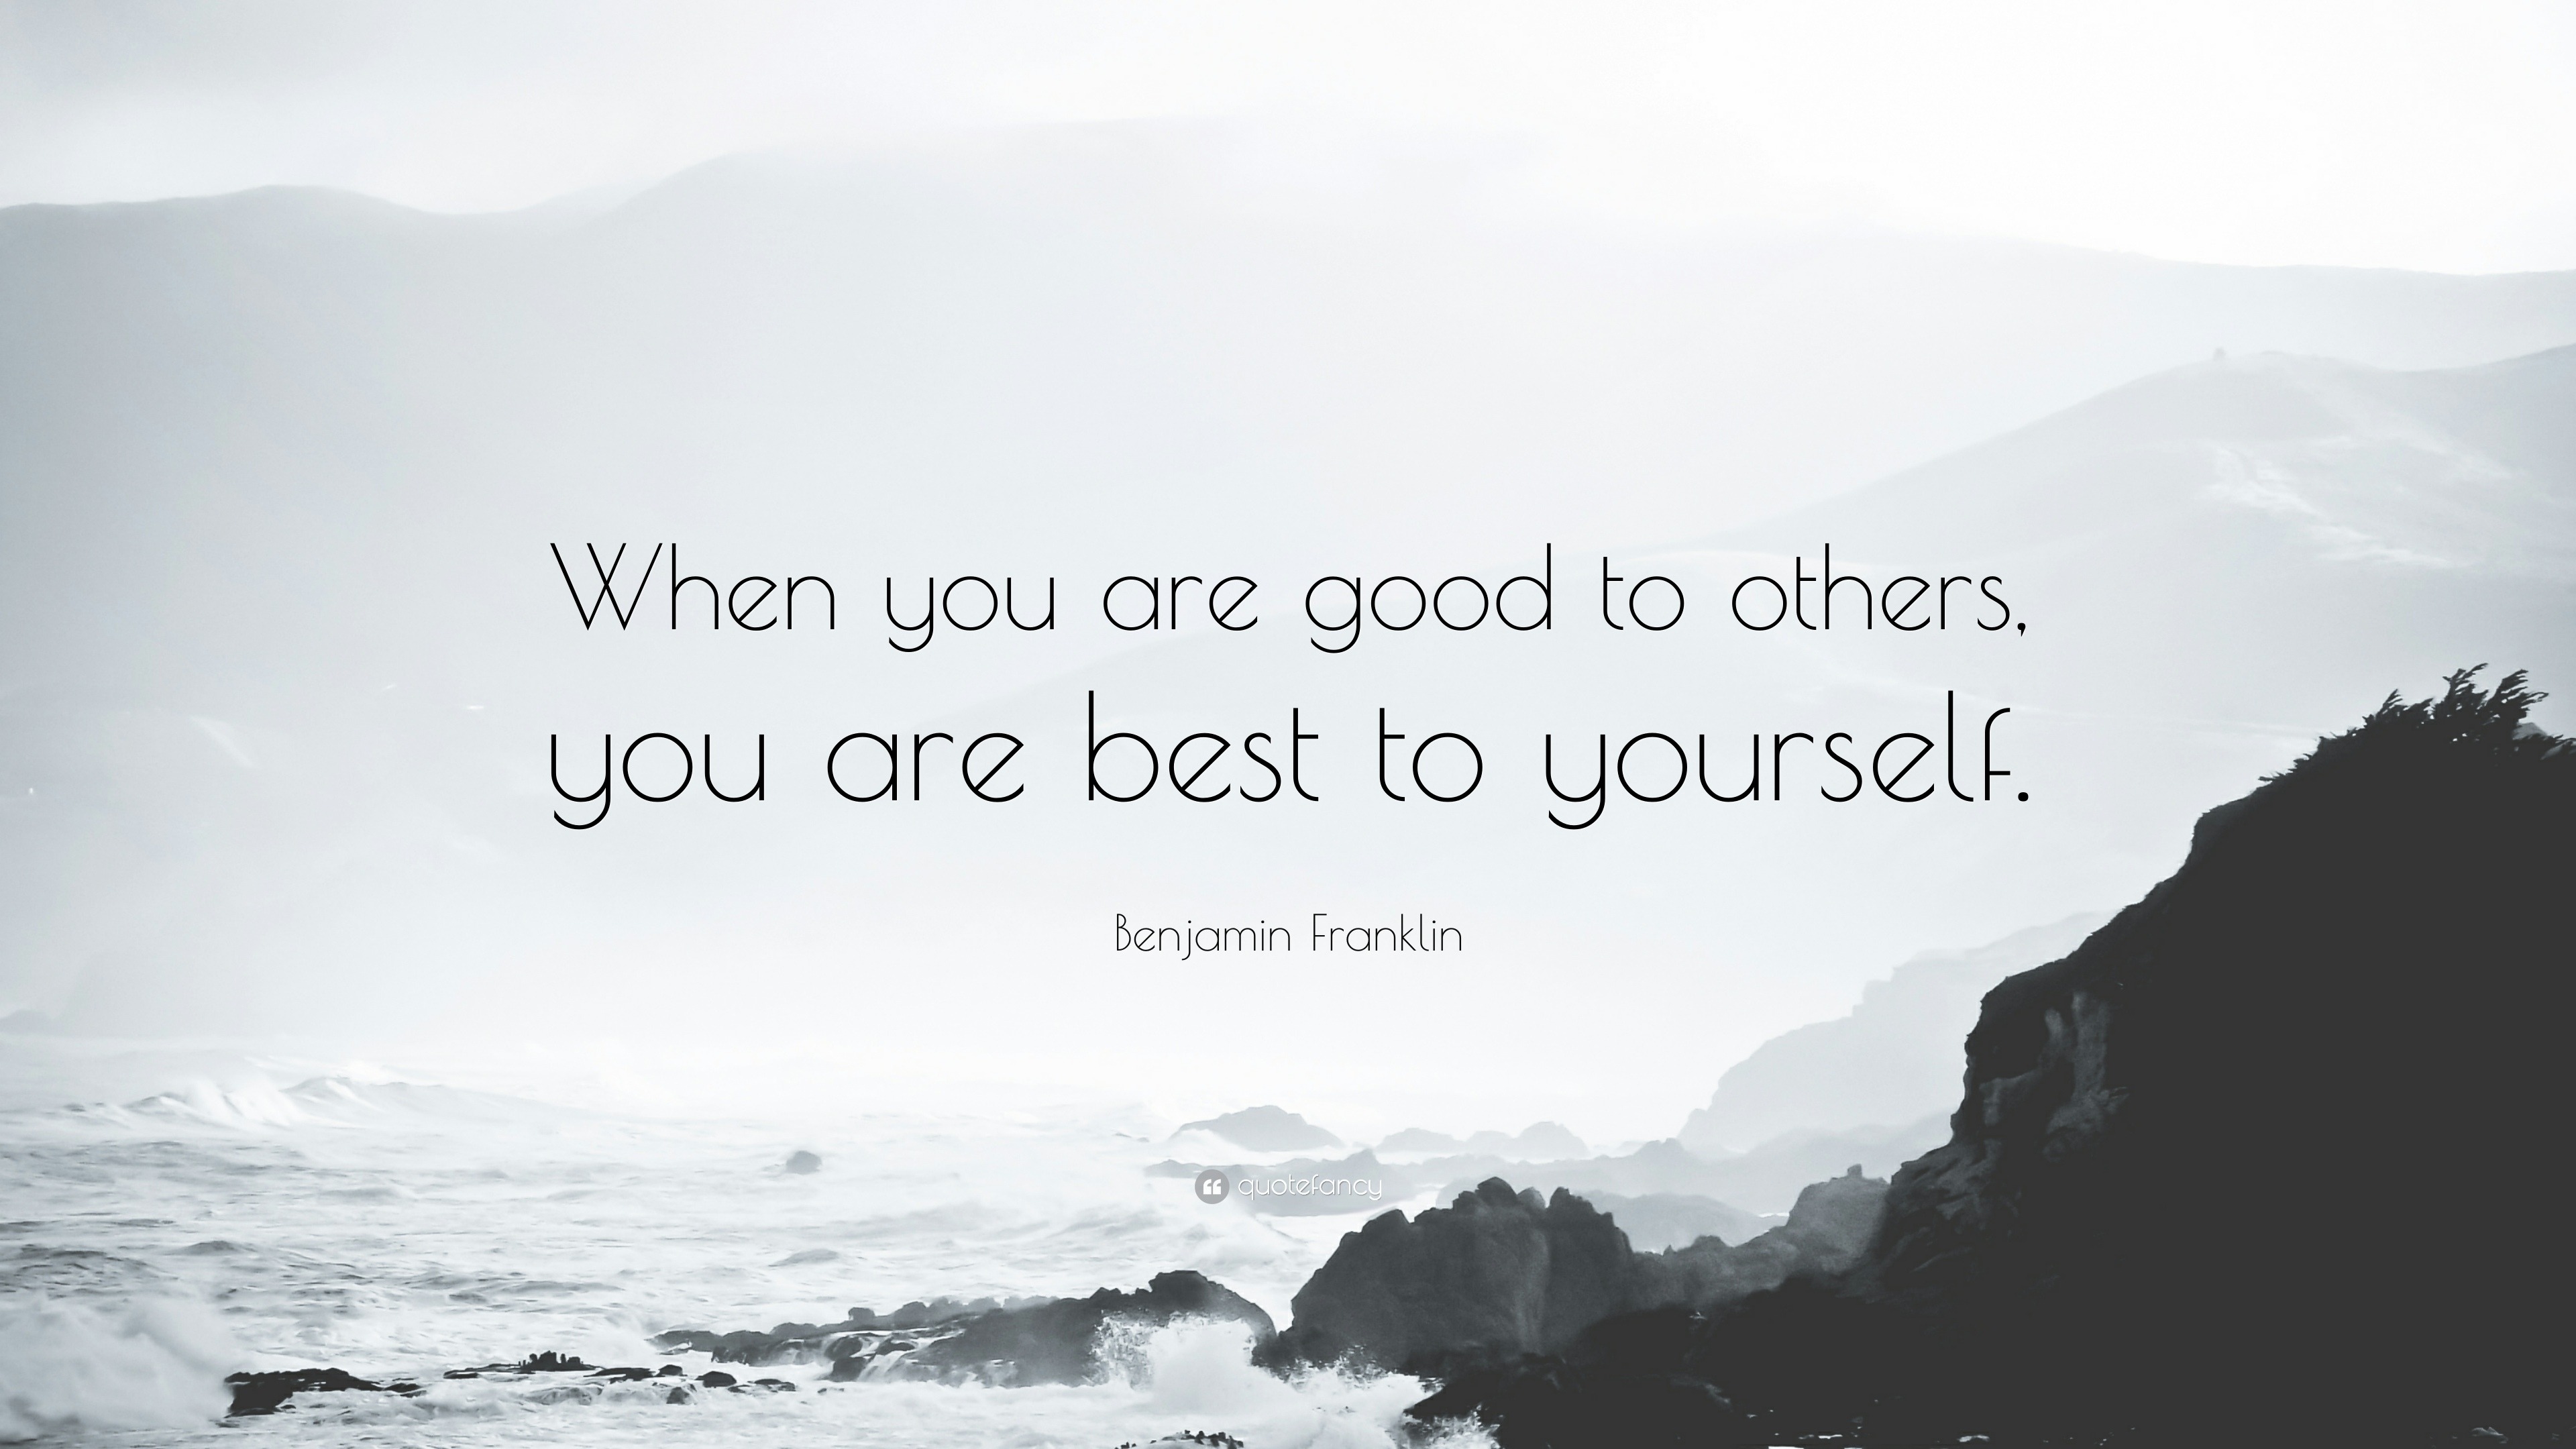 Benjamin Franklin Quote When You Are Good To Others You Are Best To Yourself 7 Wallpapers Quotefancy